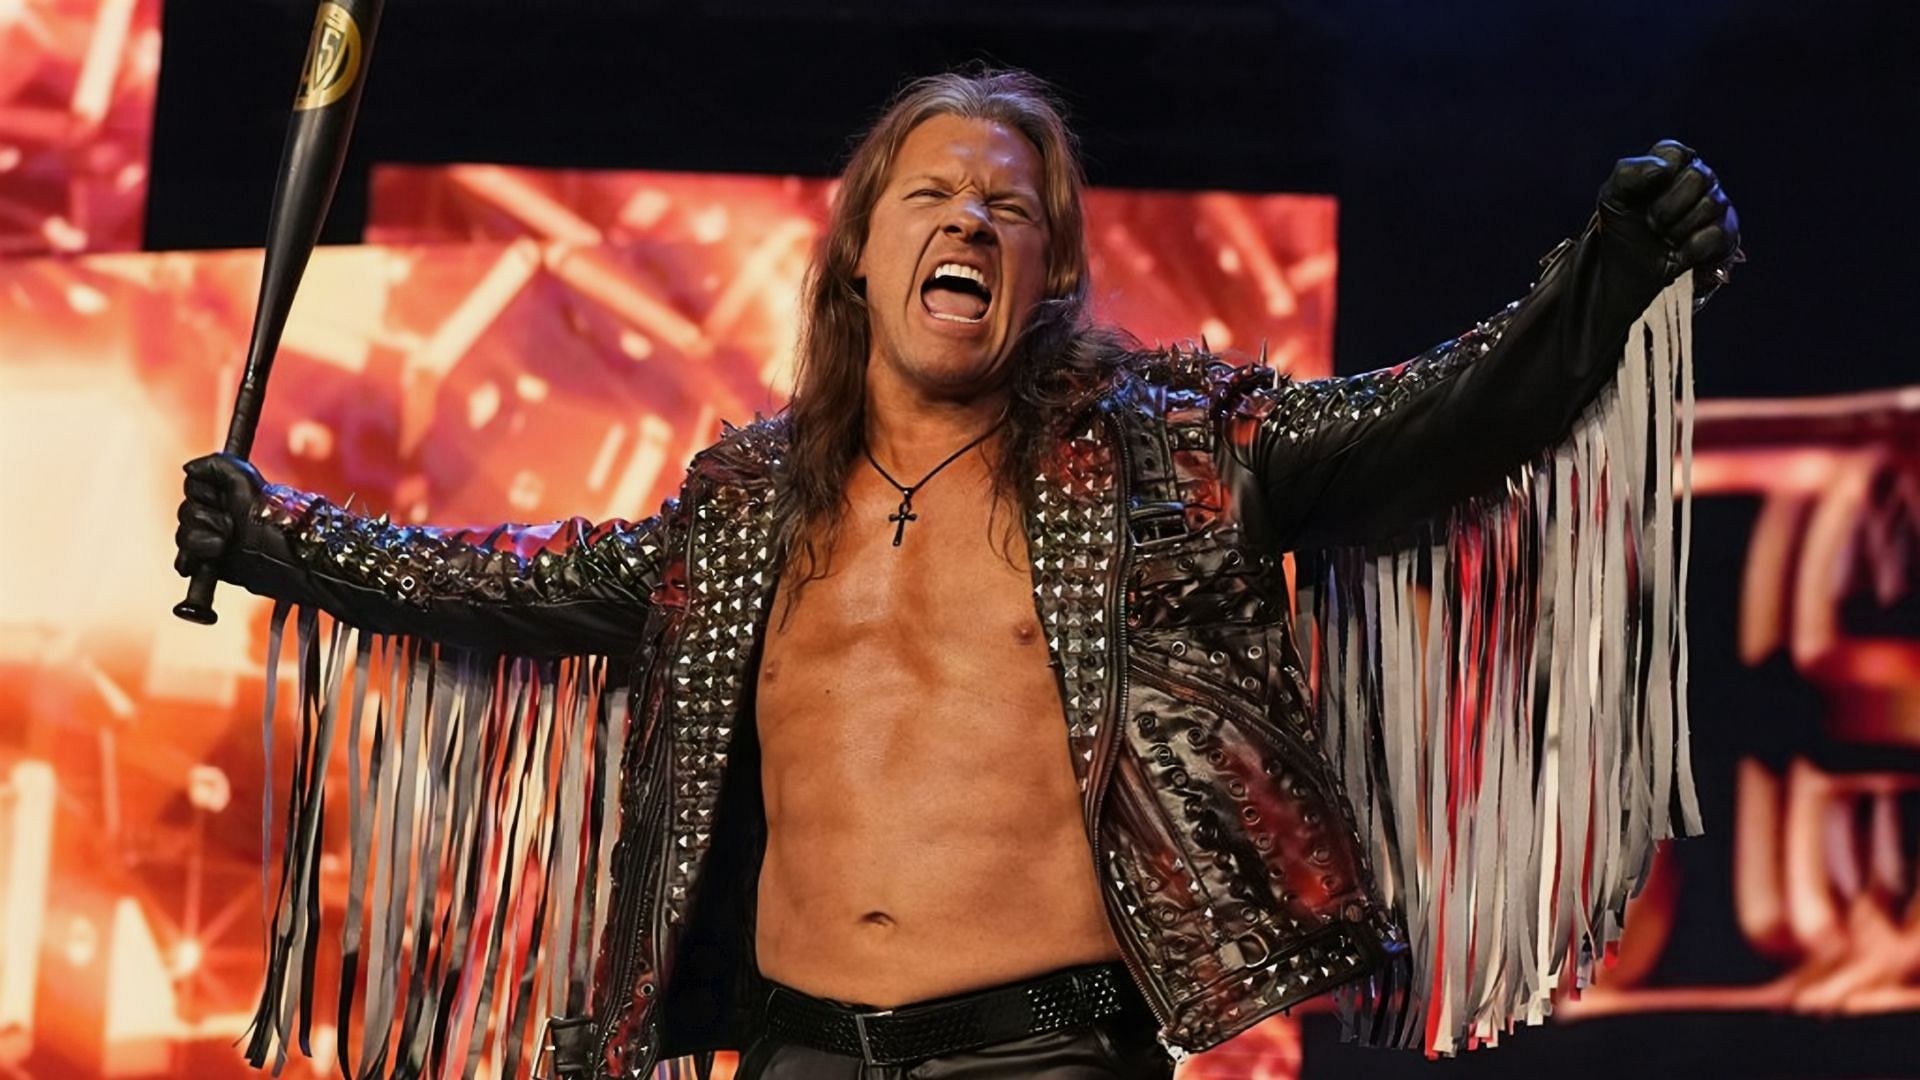 Chris Jericho is a founding member of AEW